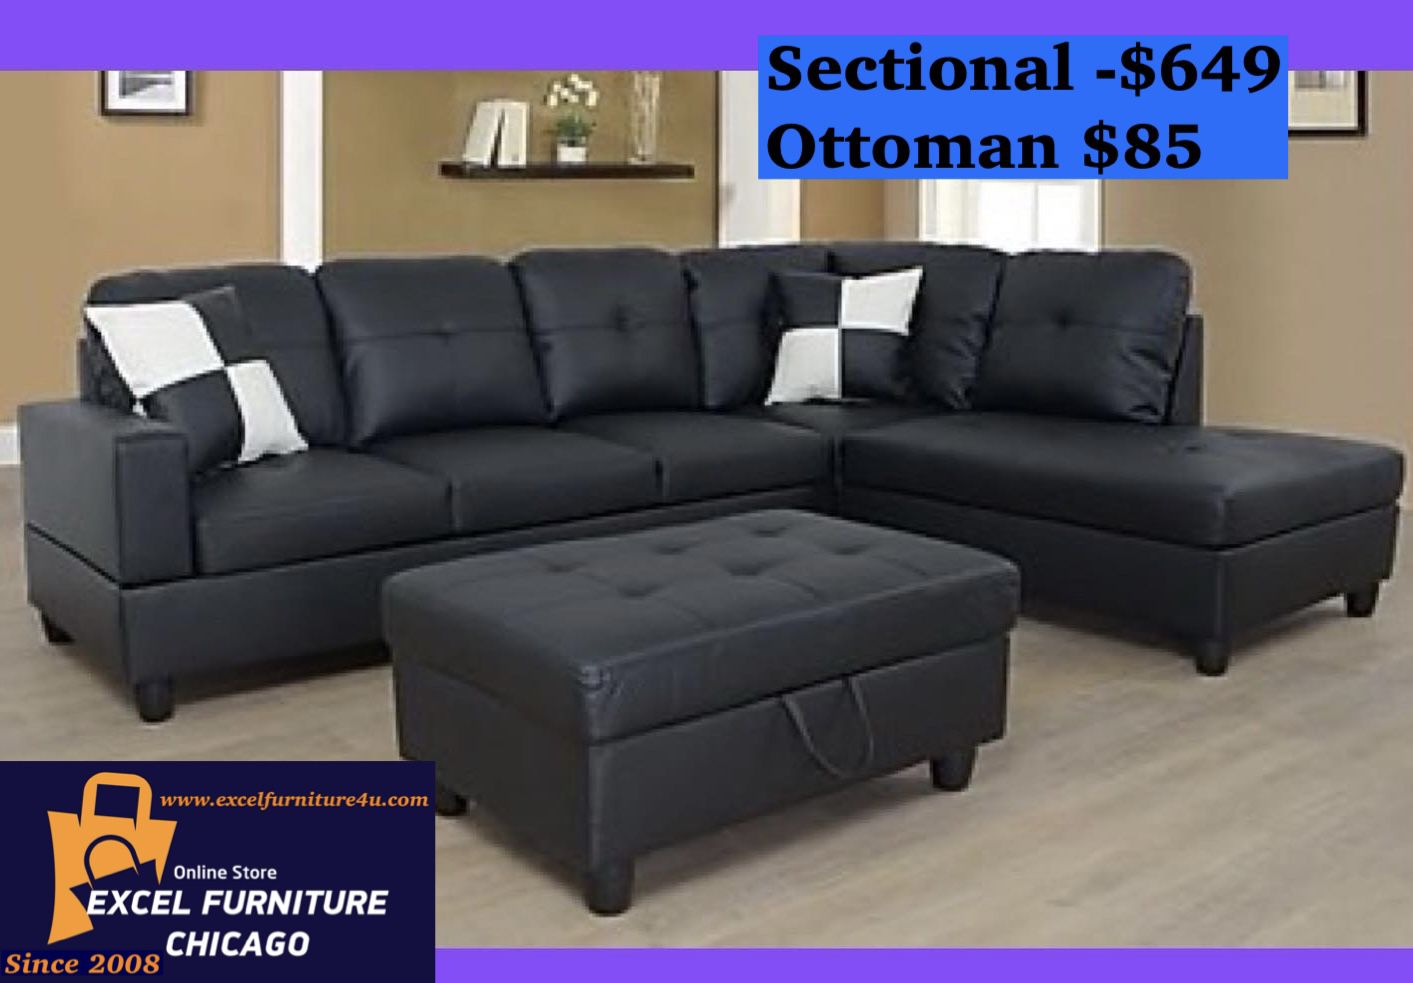 Brand New Sectional Sofa Couch 